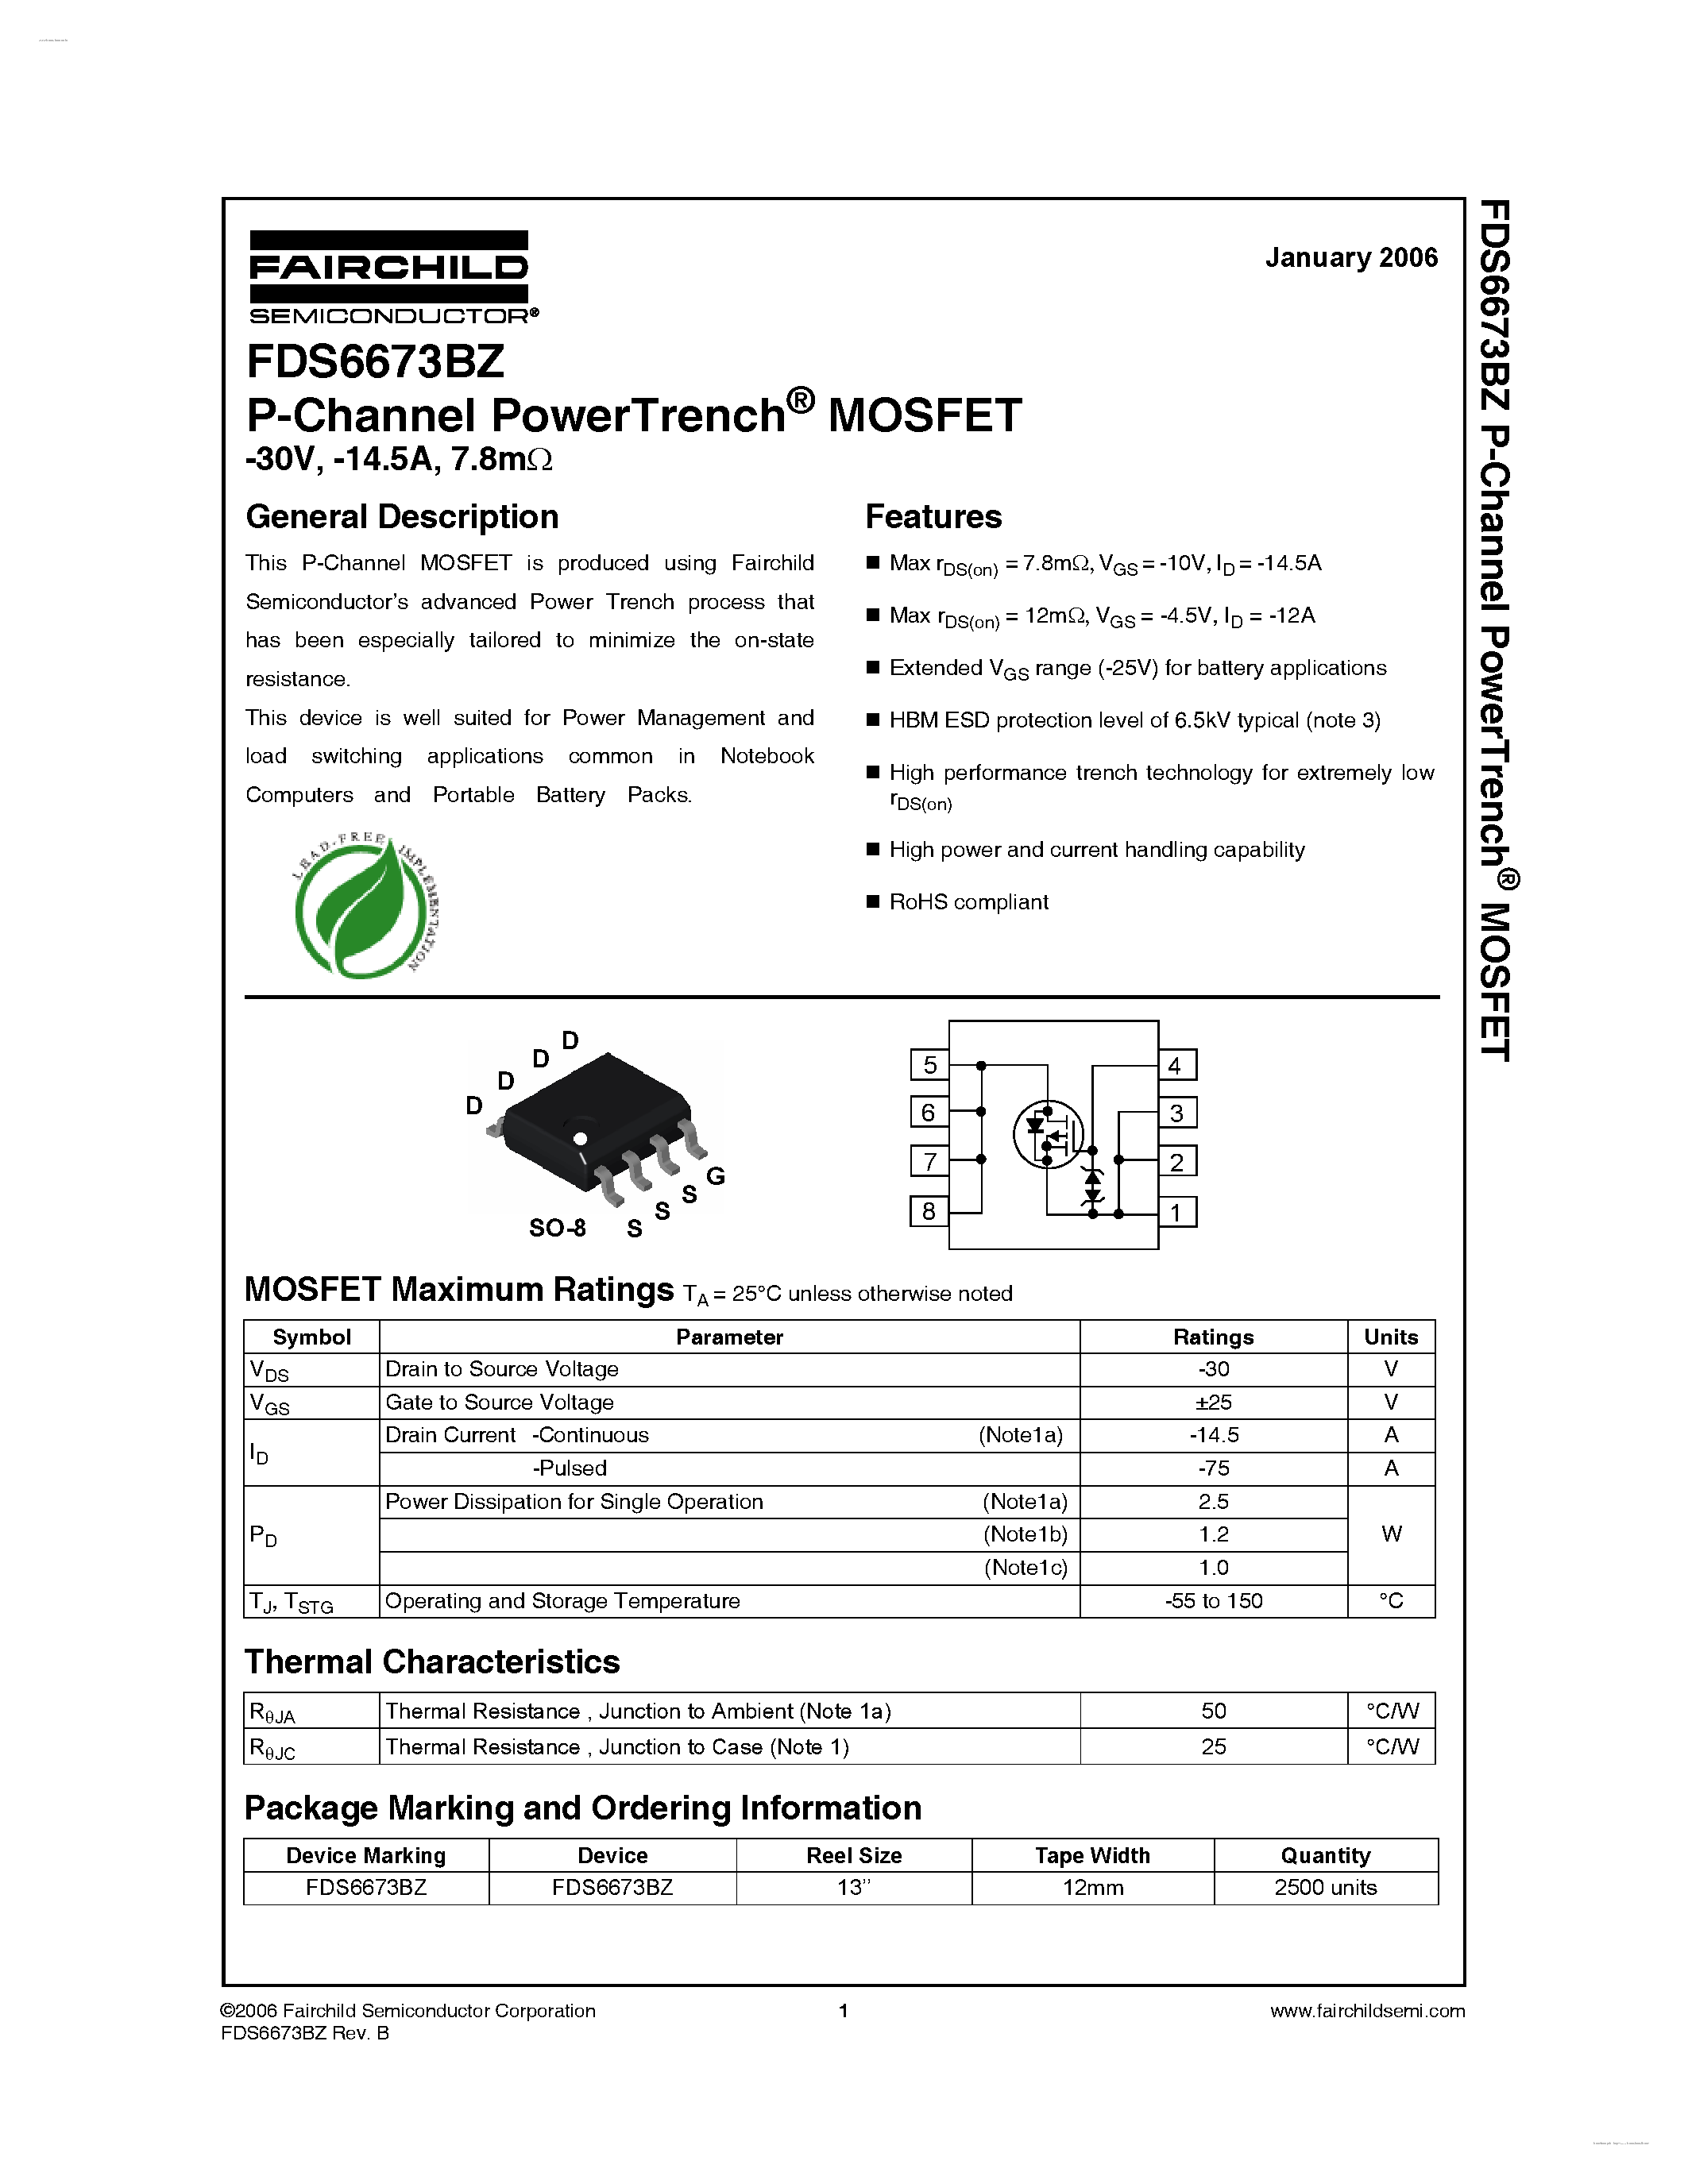 Datasheet FDS6673BZ - P-Channel PowerTrench MOSFET page 1